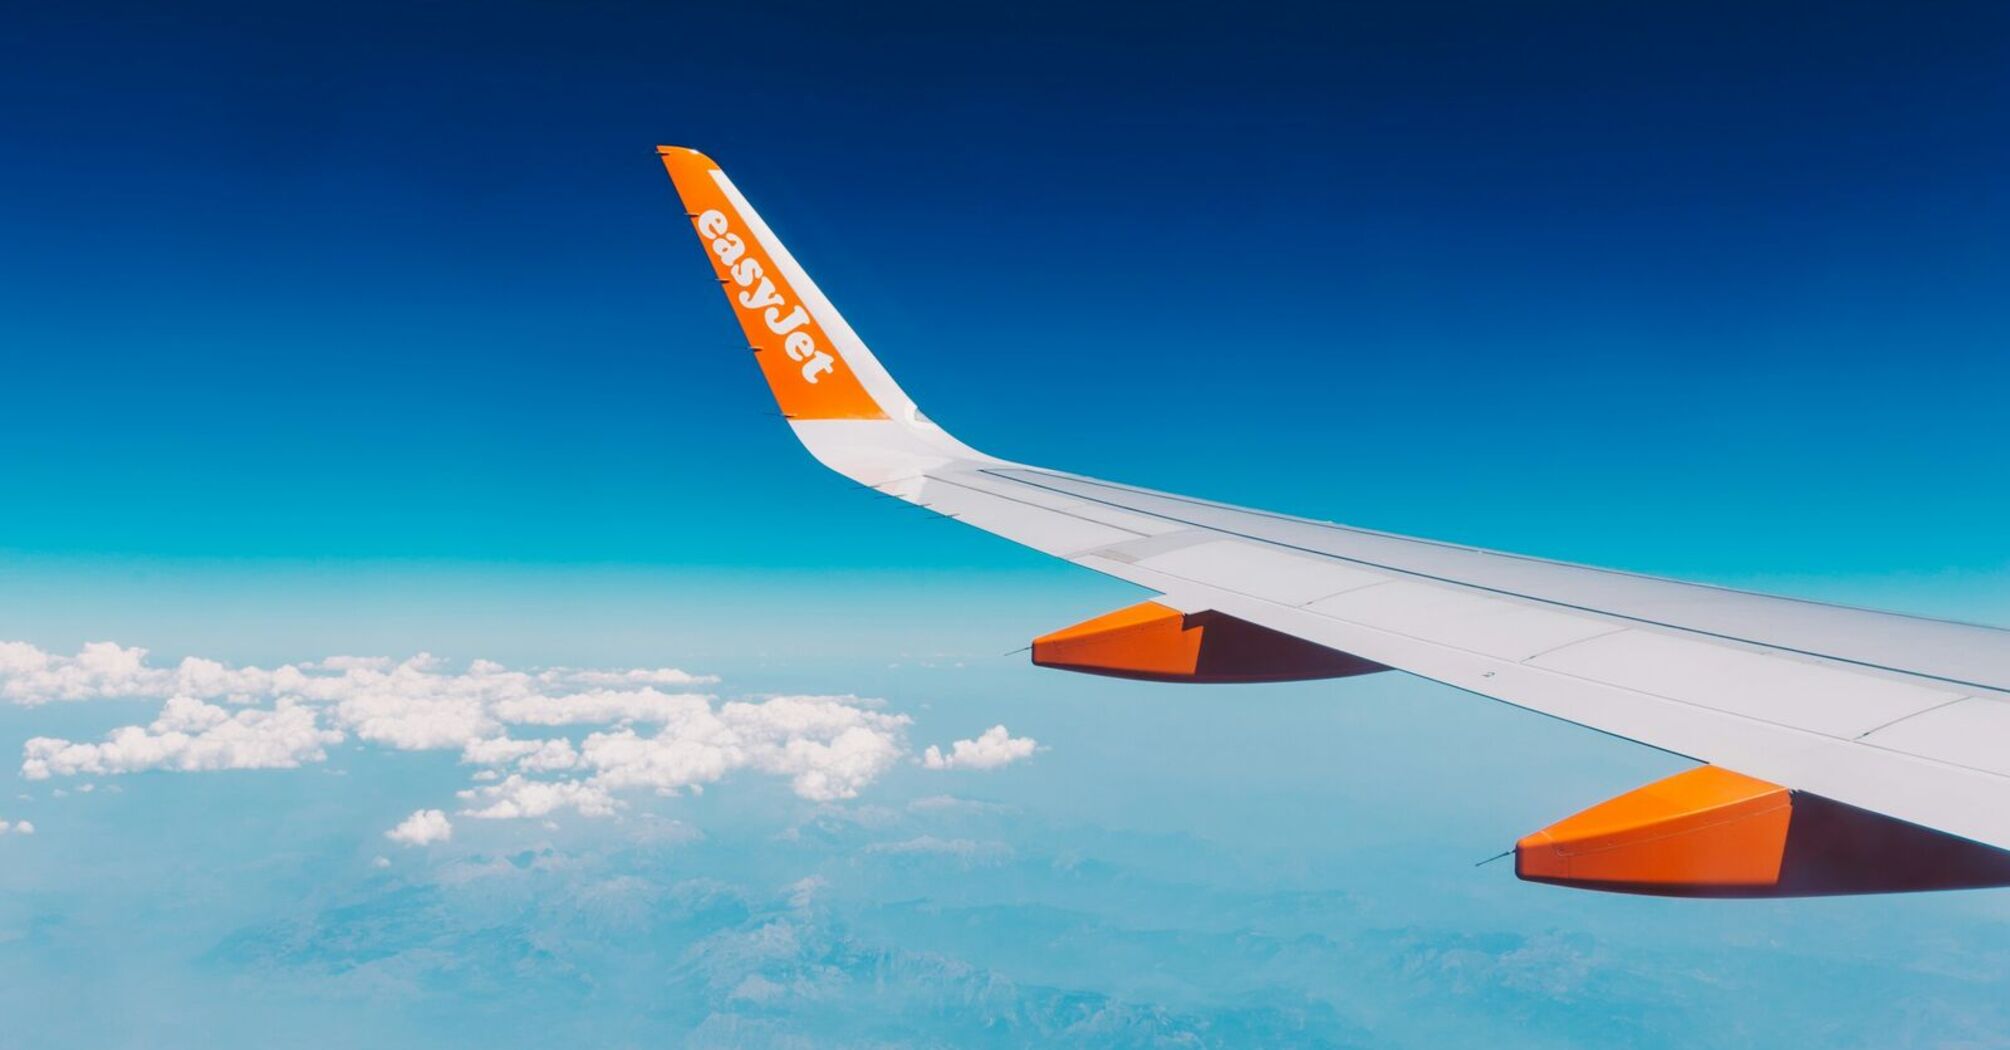 An airplane wing with the easyJet logo flying over a landscape with clouds and blue sky 